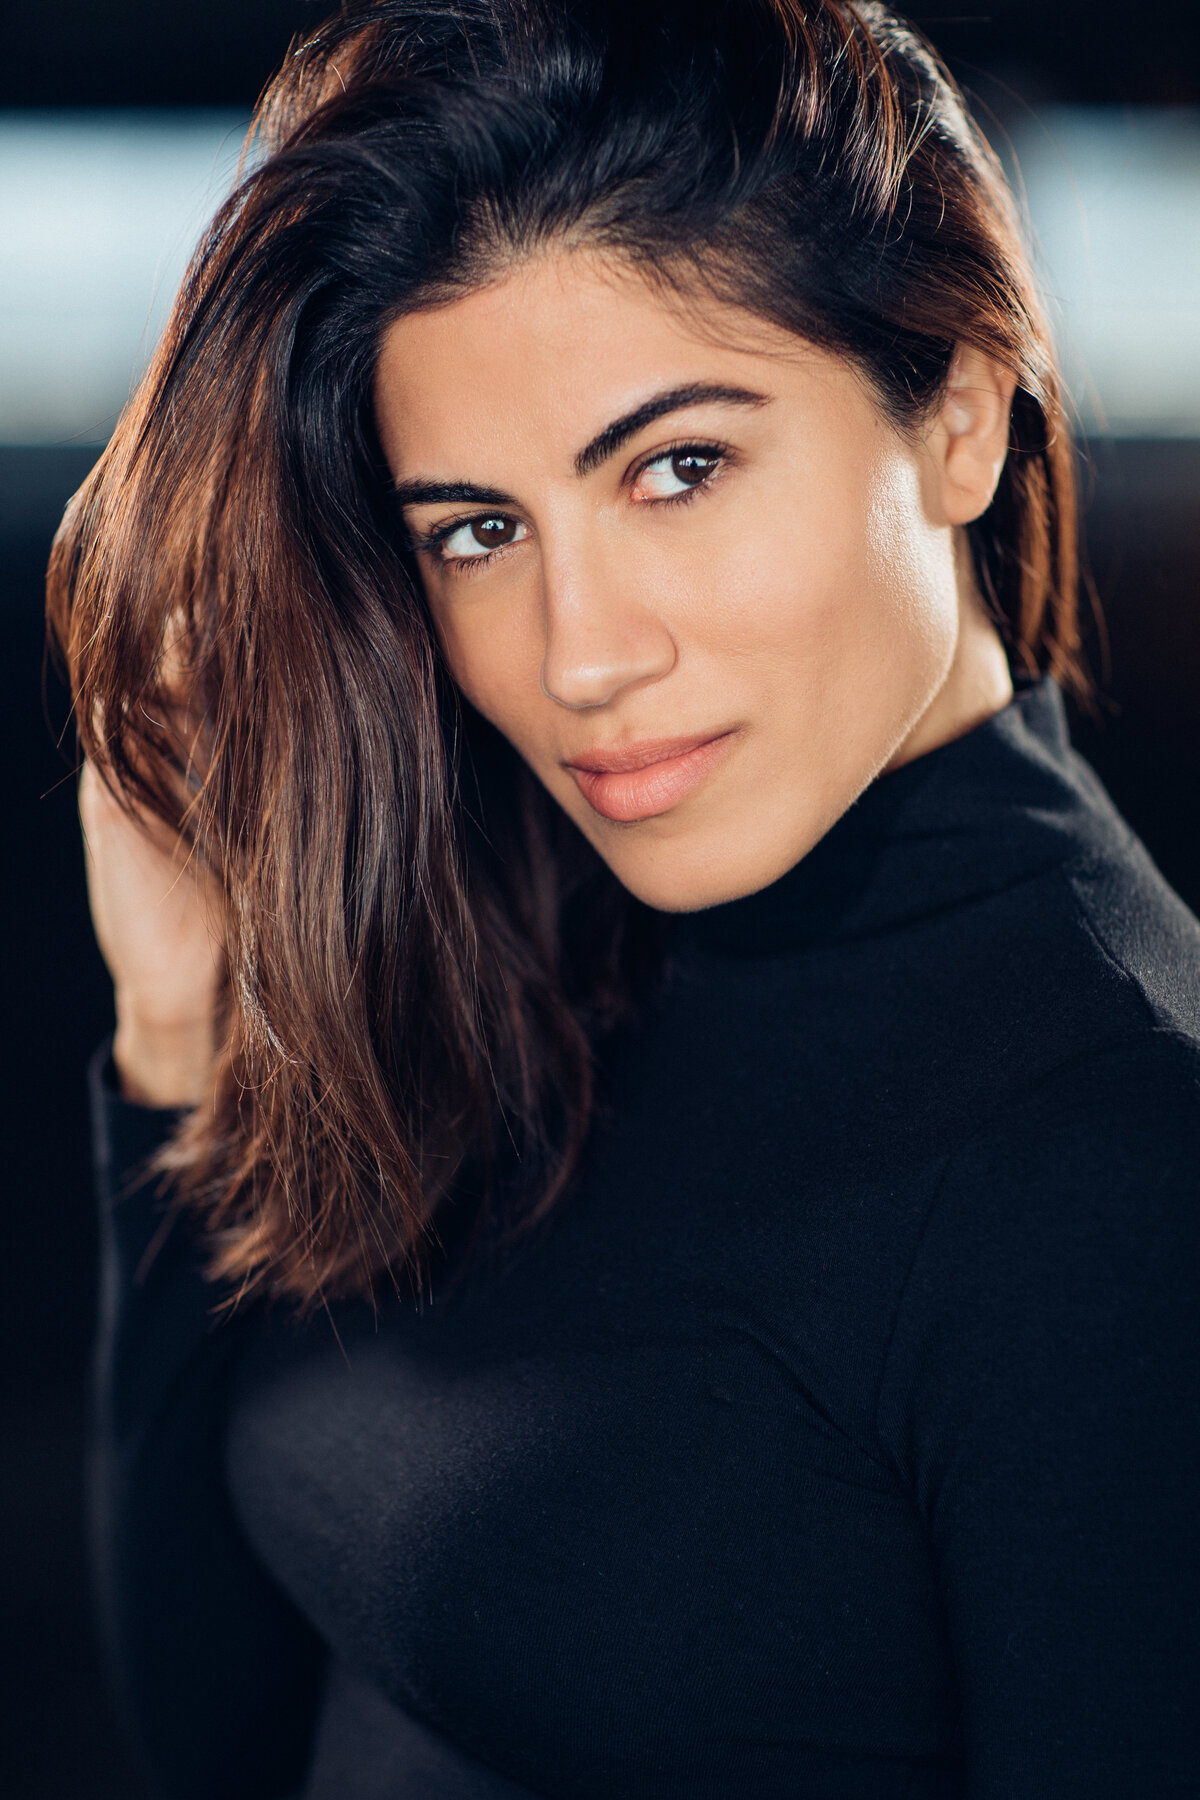 Headshot Photograph Of Young Woman In Black Turtle Neck Long Sleeves Los Angeles